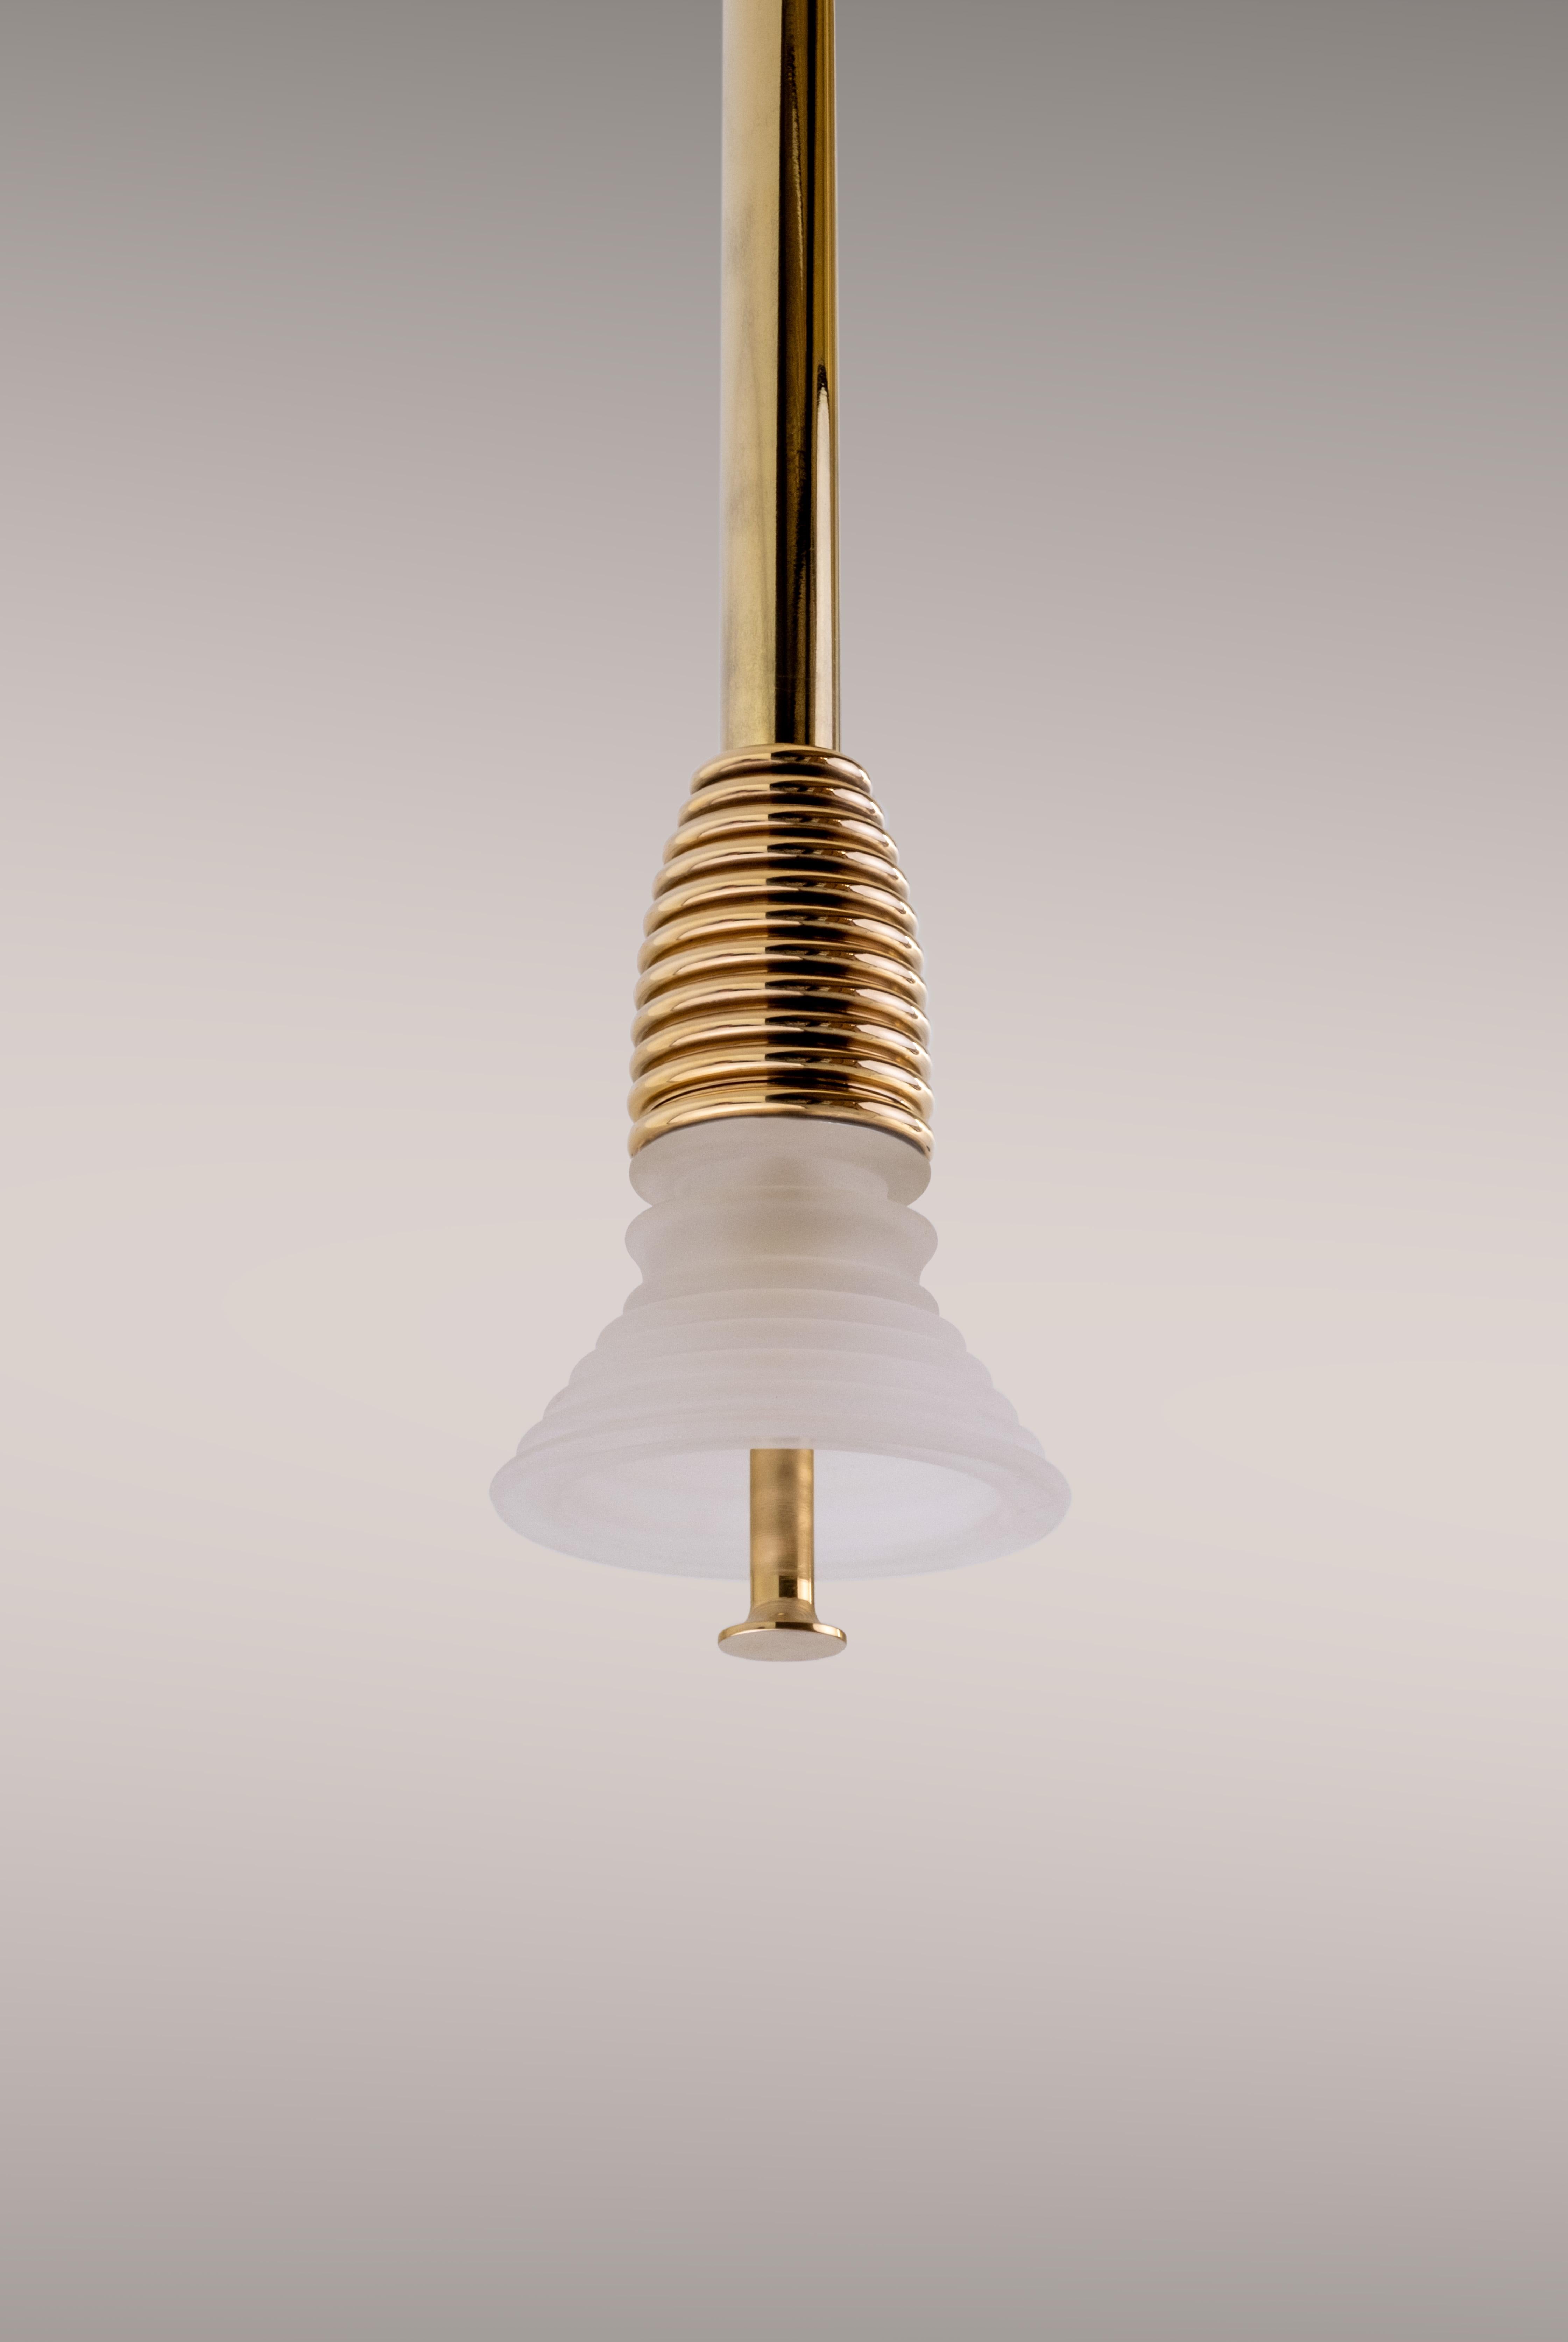 British The Insulator 'A' Pendant in dark brass and clear glass by NOVOCASTRIAN deco For Sale